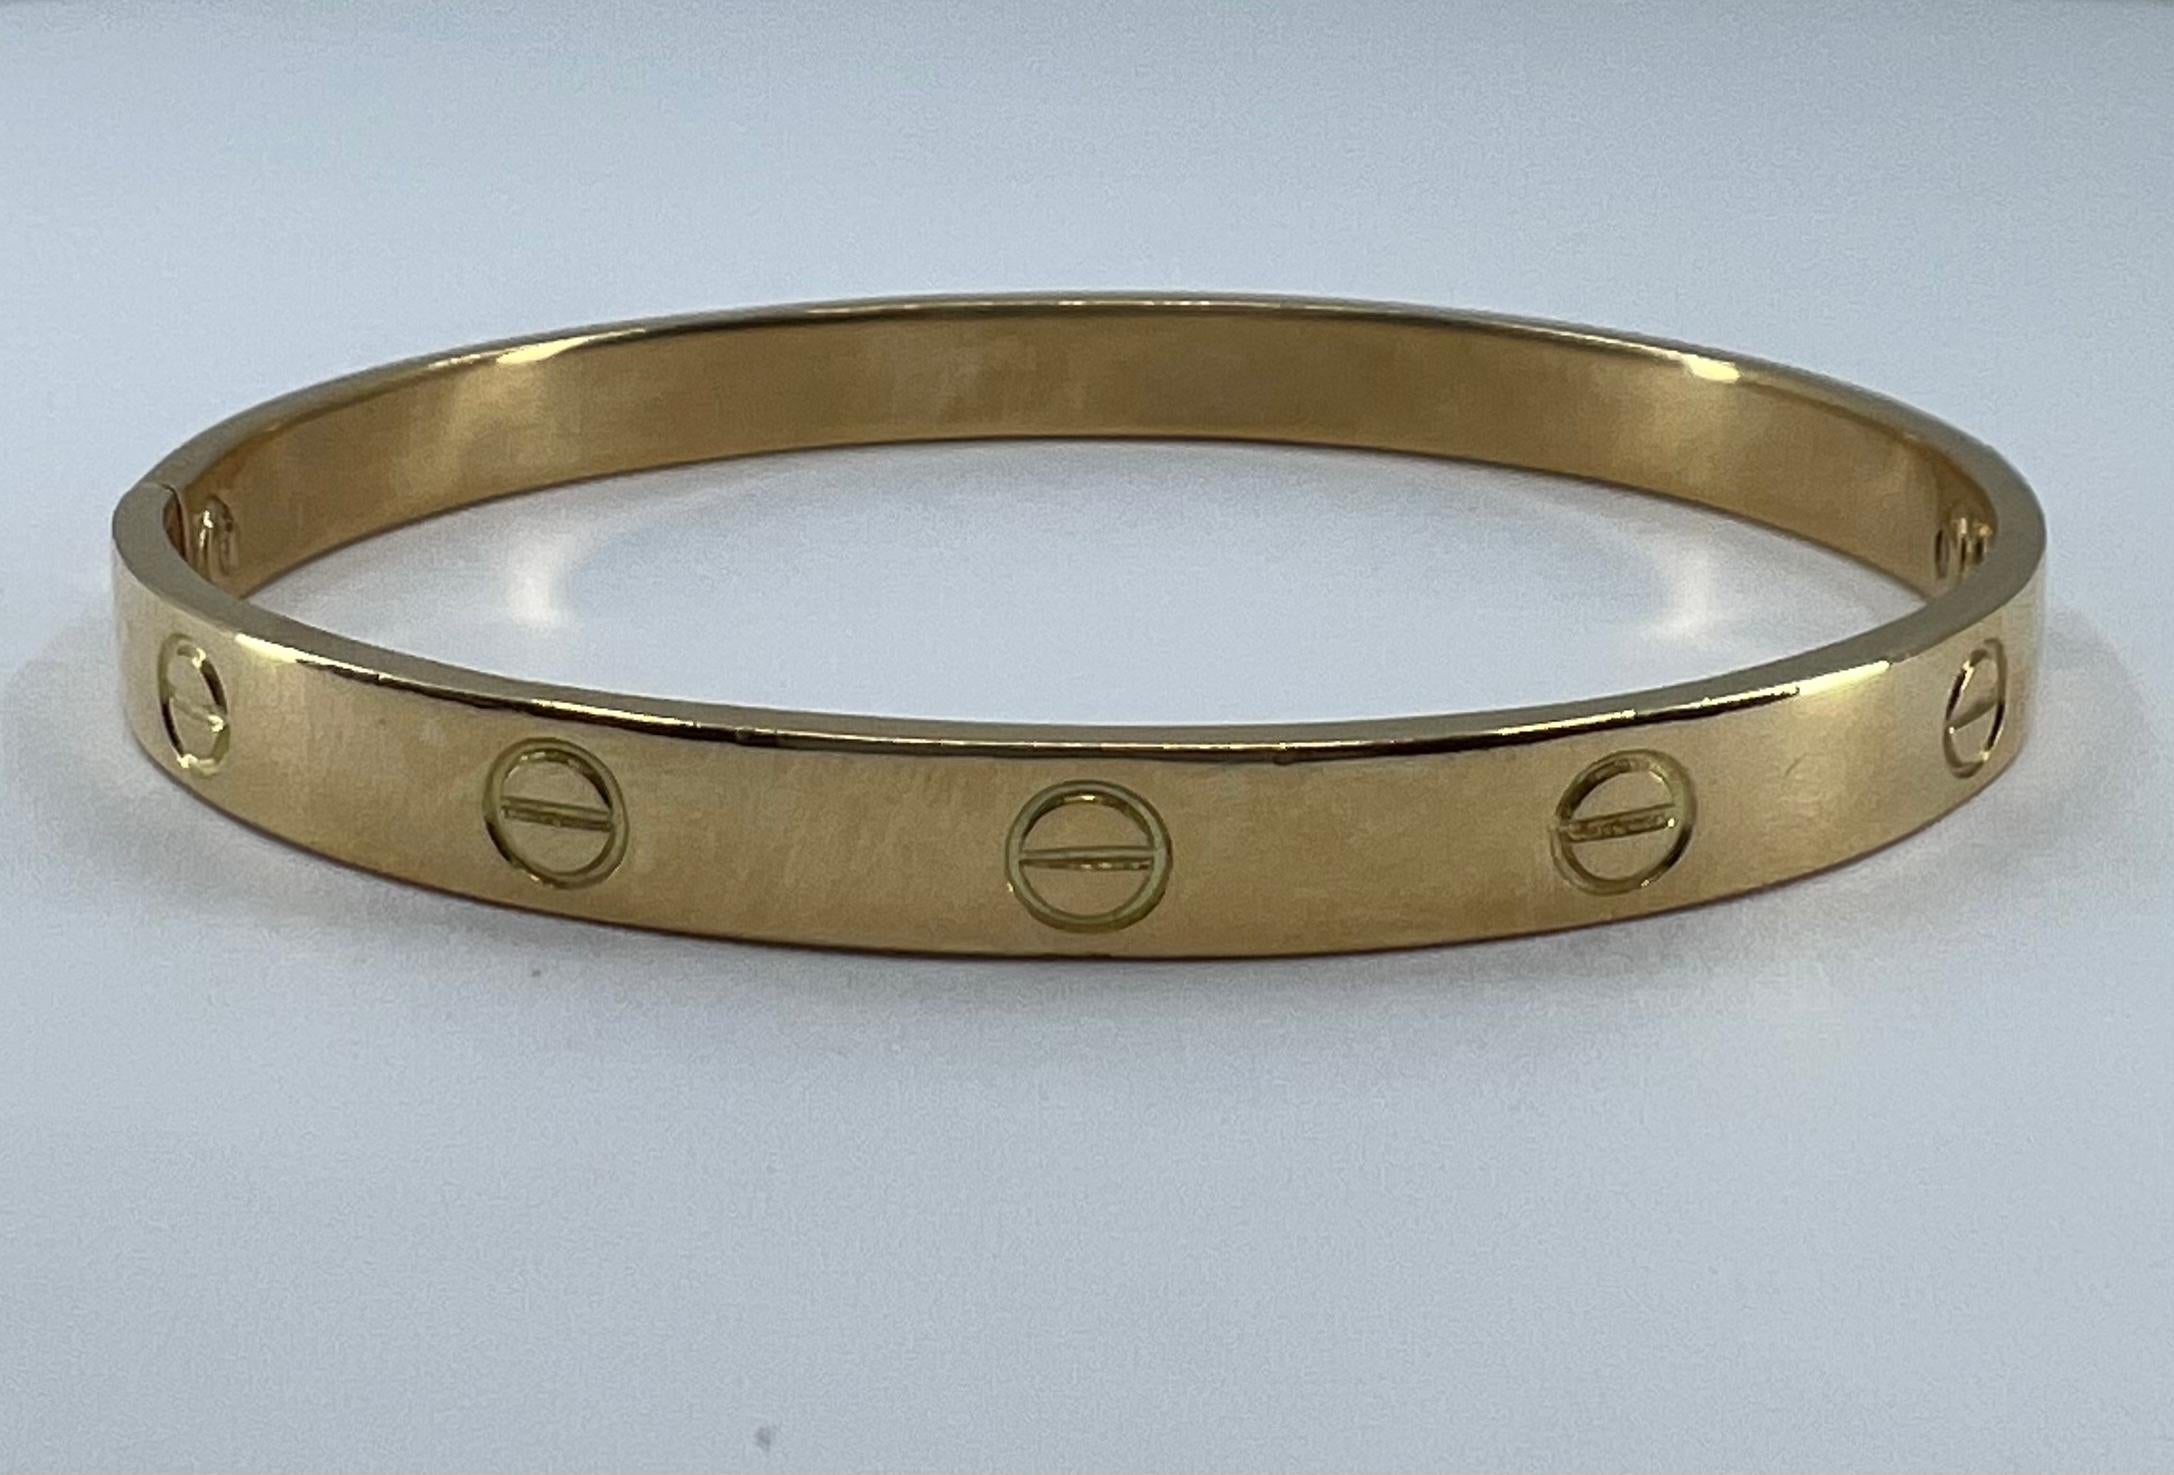 A vintage Cartier 18k gold Love bracelet from the 1970 (stamped).

Being a symbol of commitment, a Love bracelet was designed as a minimalistic piece in 1969 and was bound to become iconic.

The Cartier Love bracelet is supposed to be put on by